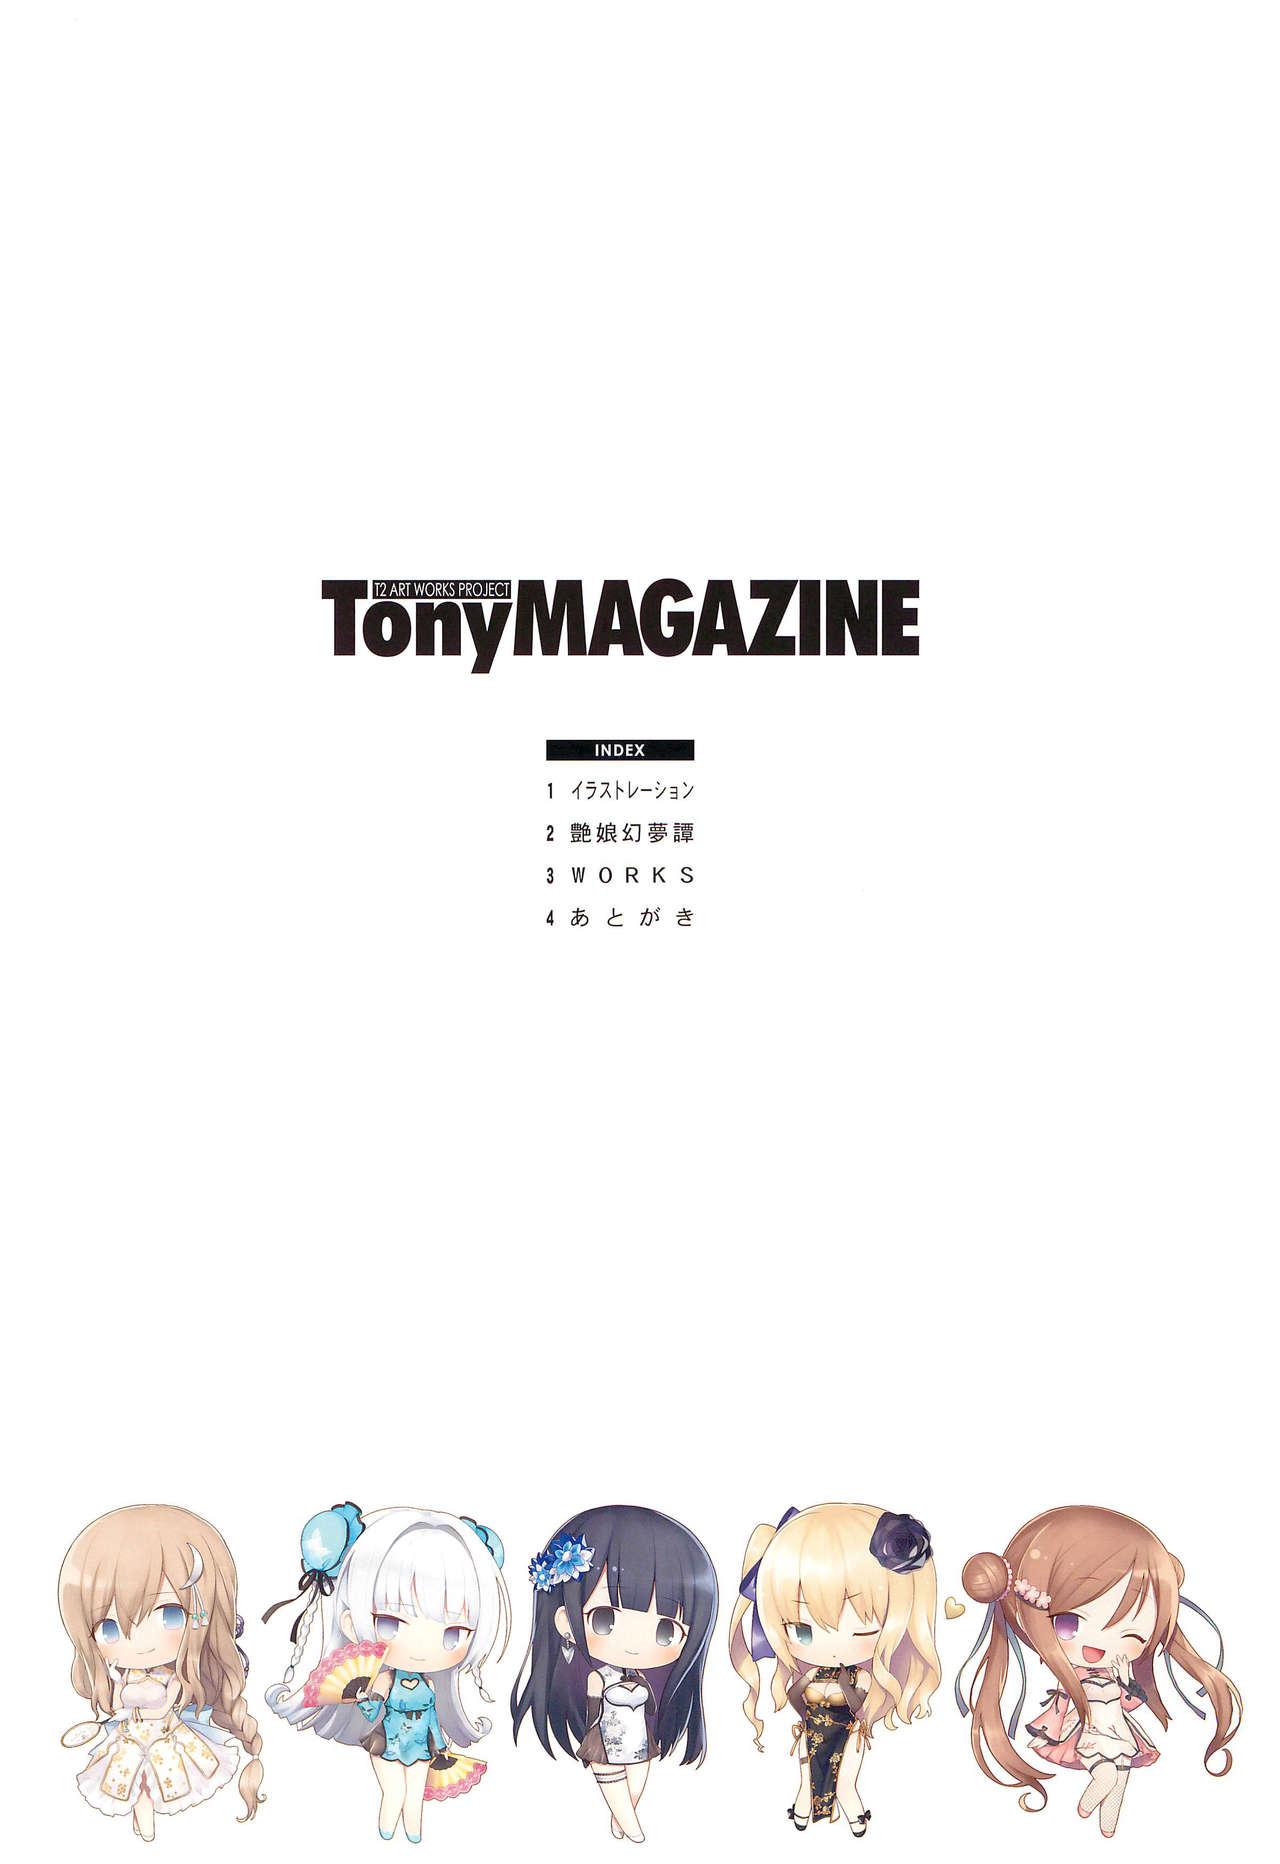 Doggystyle Tony MAGAZINE 07 - Fate grand order Final fantasy vii Coed - Page 4